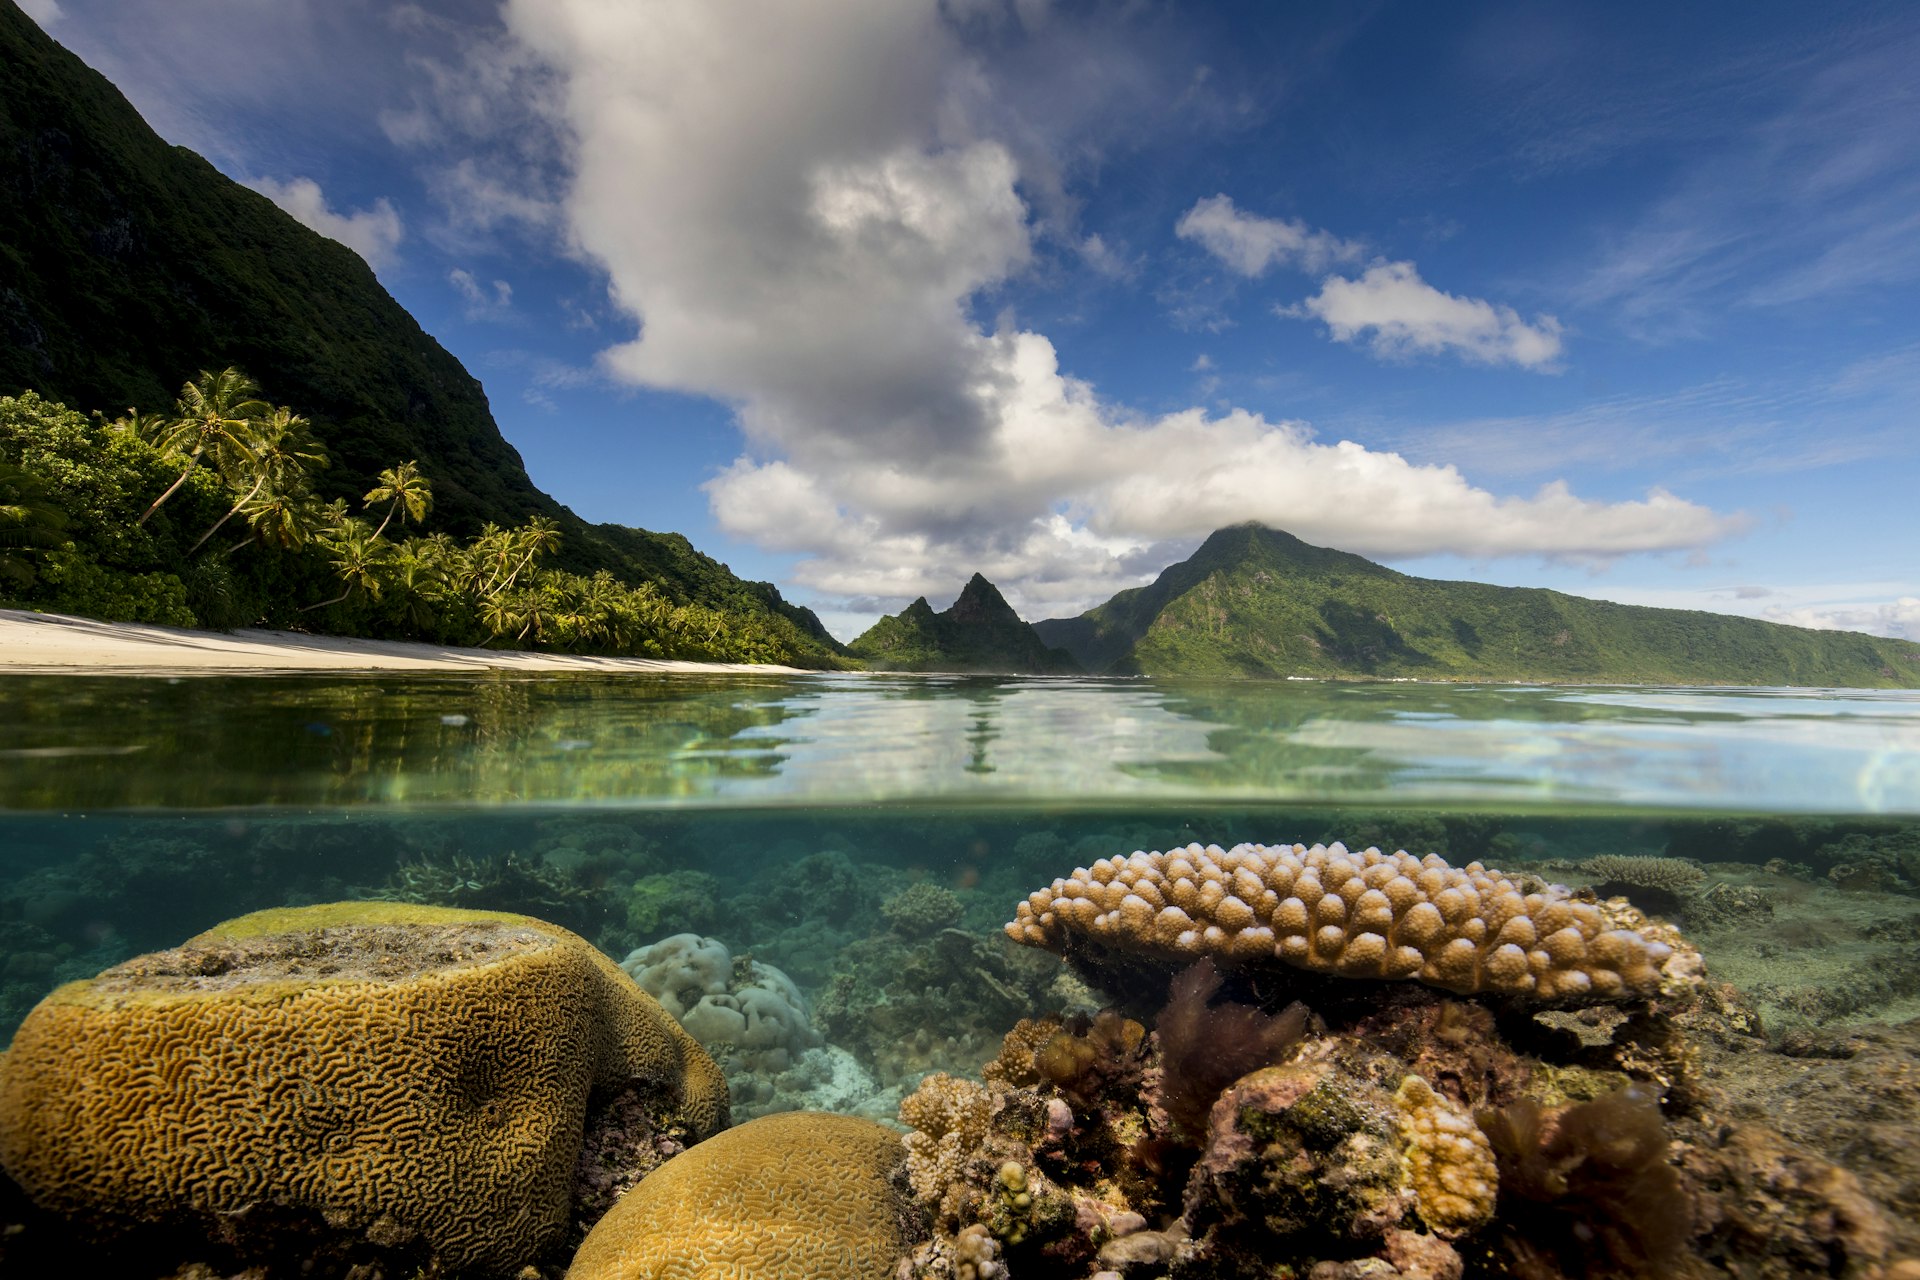 A coral reef in the National Park of American Samoa, Ofu Island